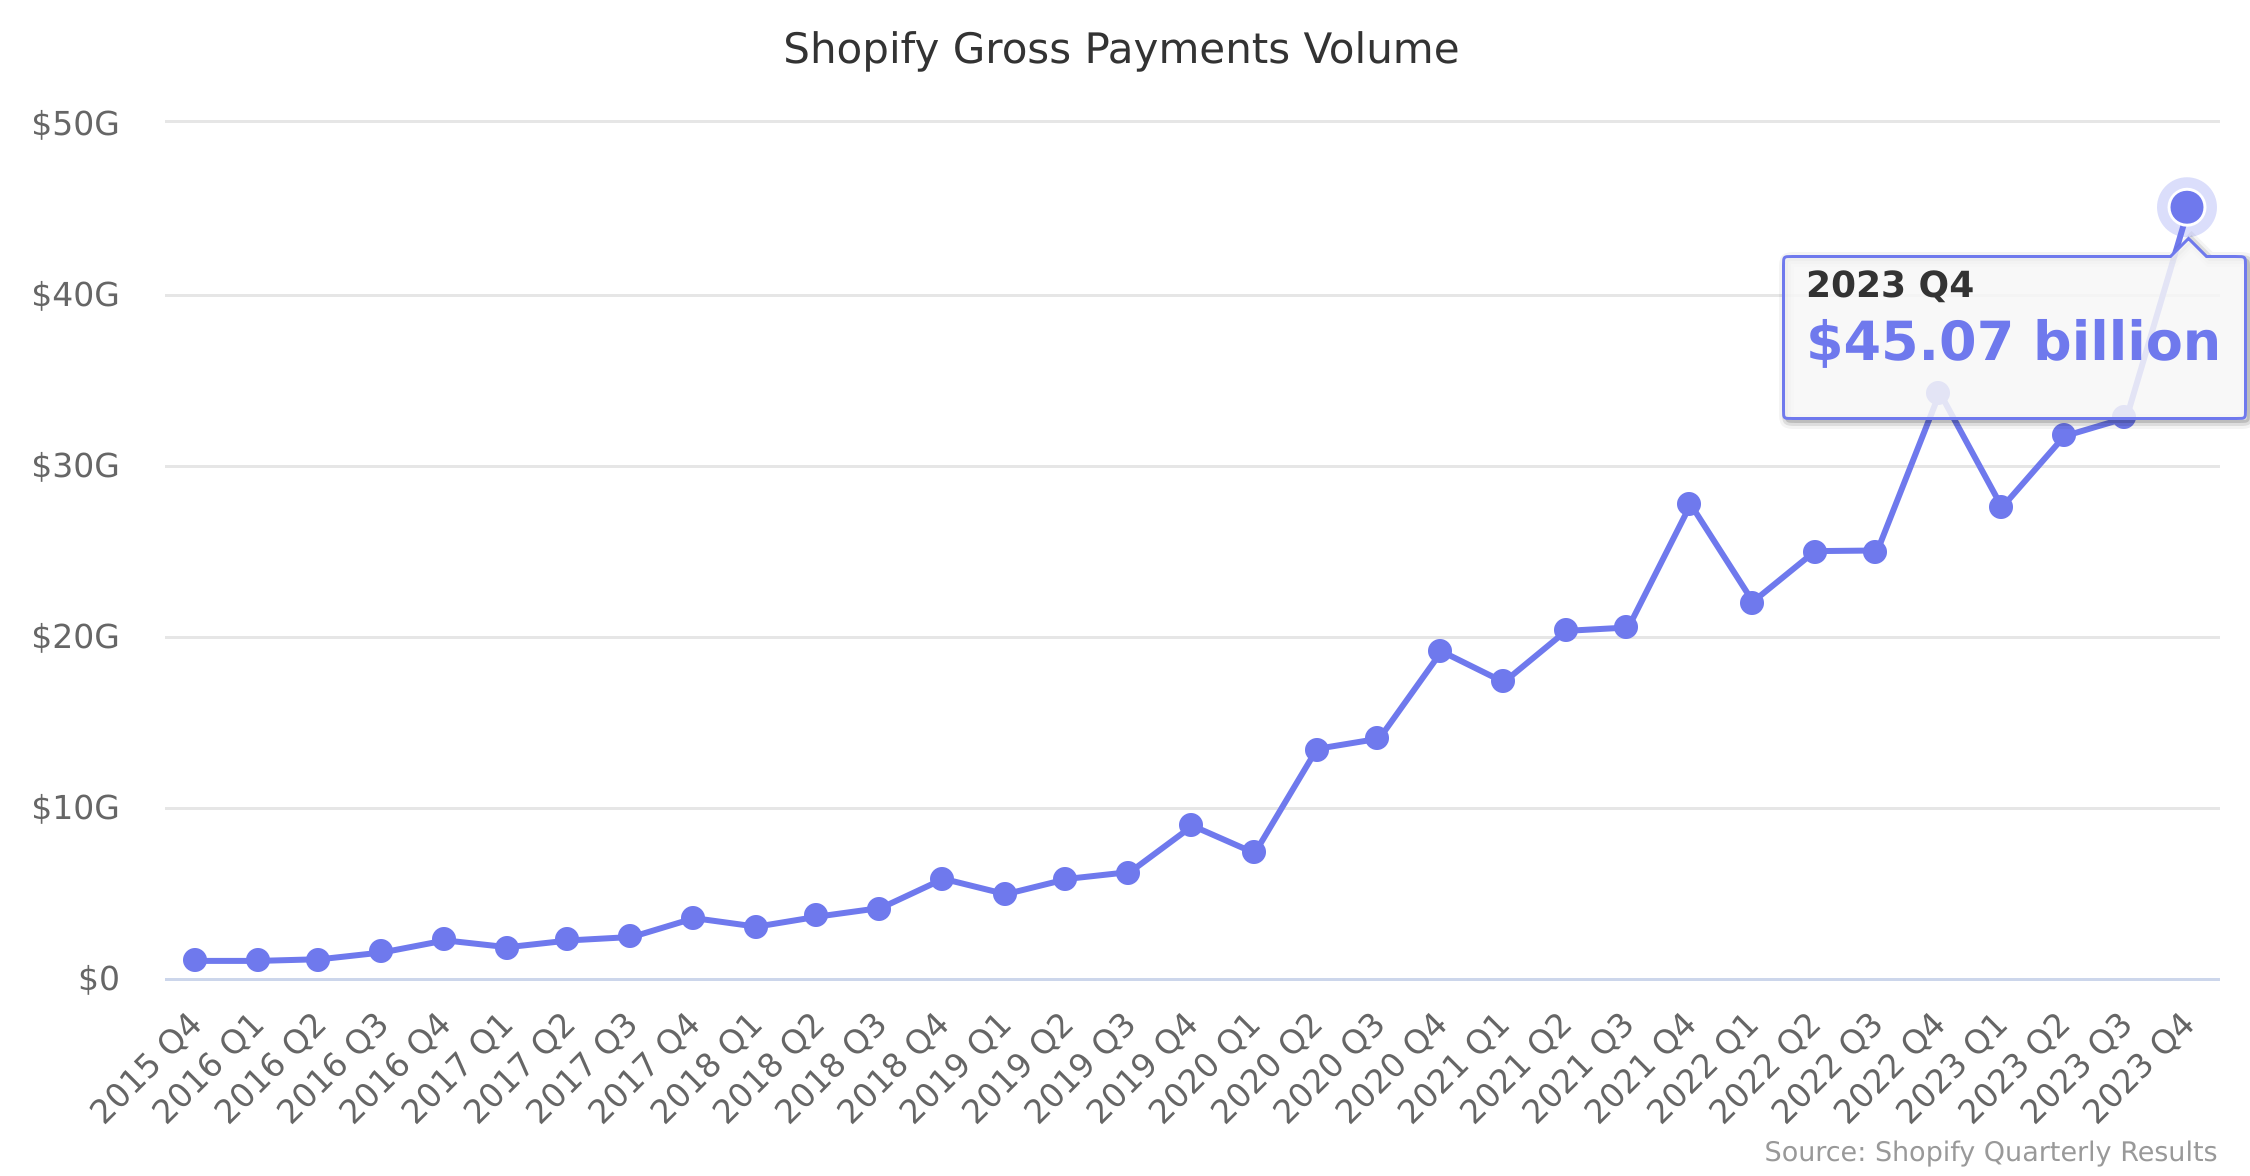 Shopify Gross Payments Volume 2015-2022